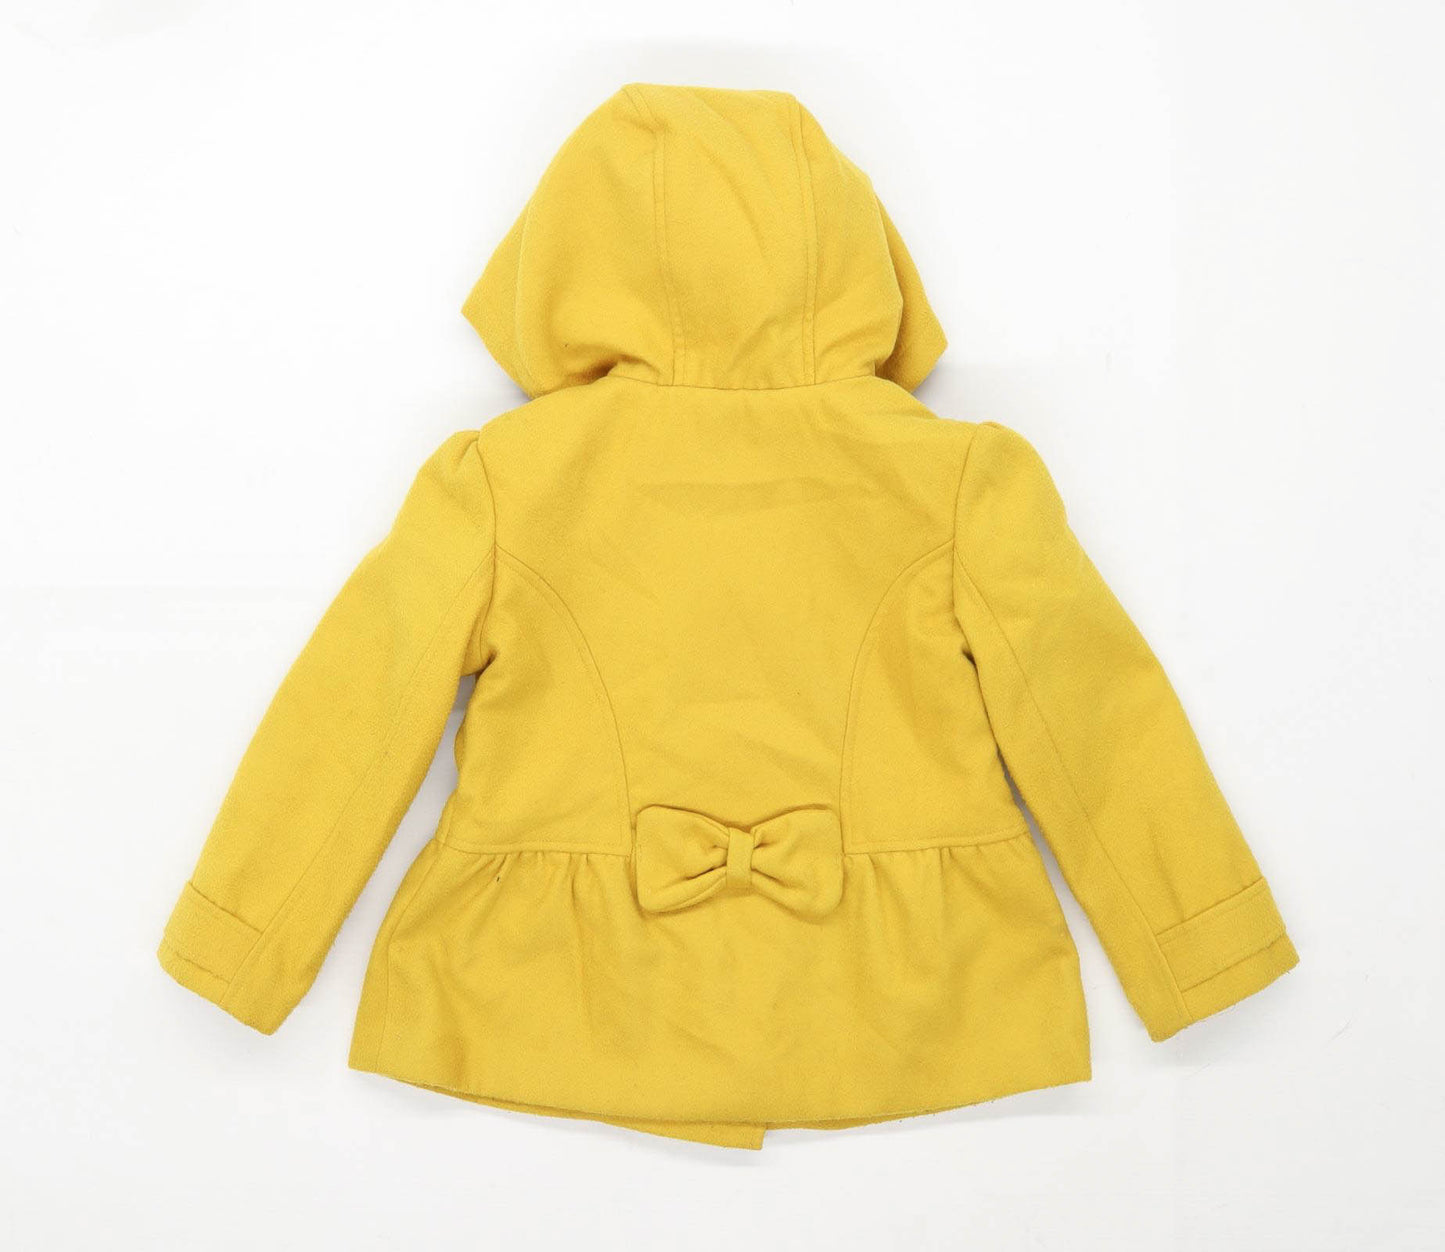 Marks & Spencer Girls Yellow Hooded Coat Age 3-4 Years